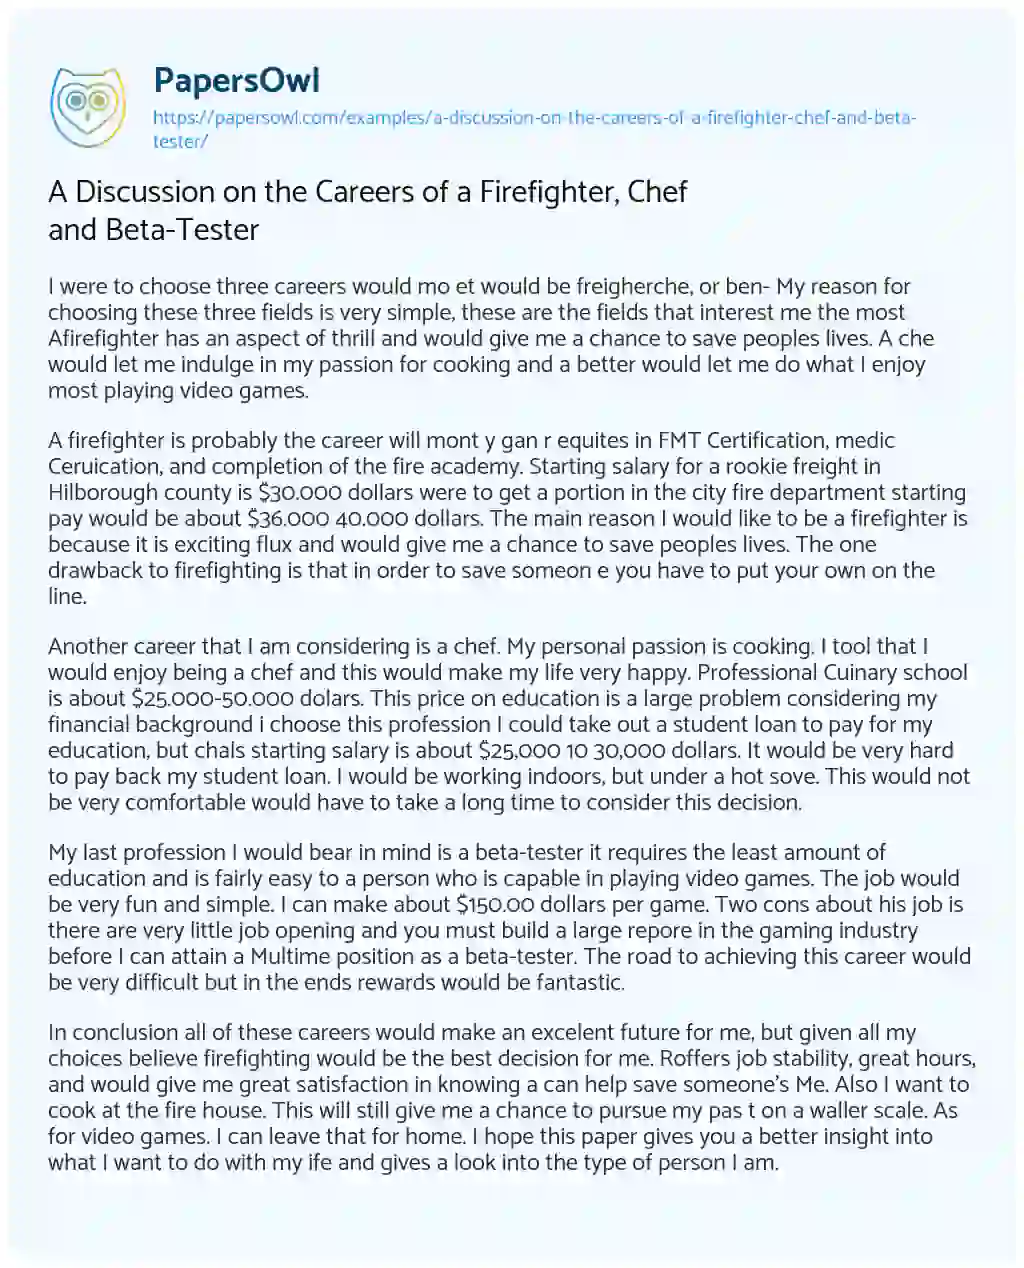 Essay on A Discussion on the Careers of a Firefighter, Chef and Beta-Tester